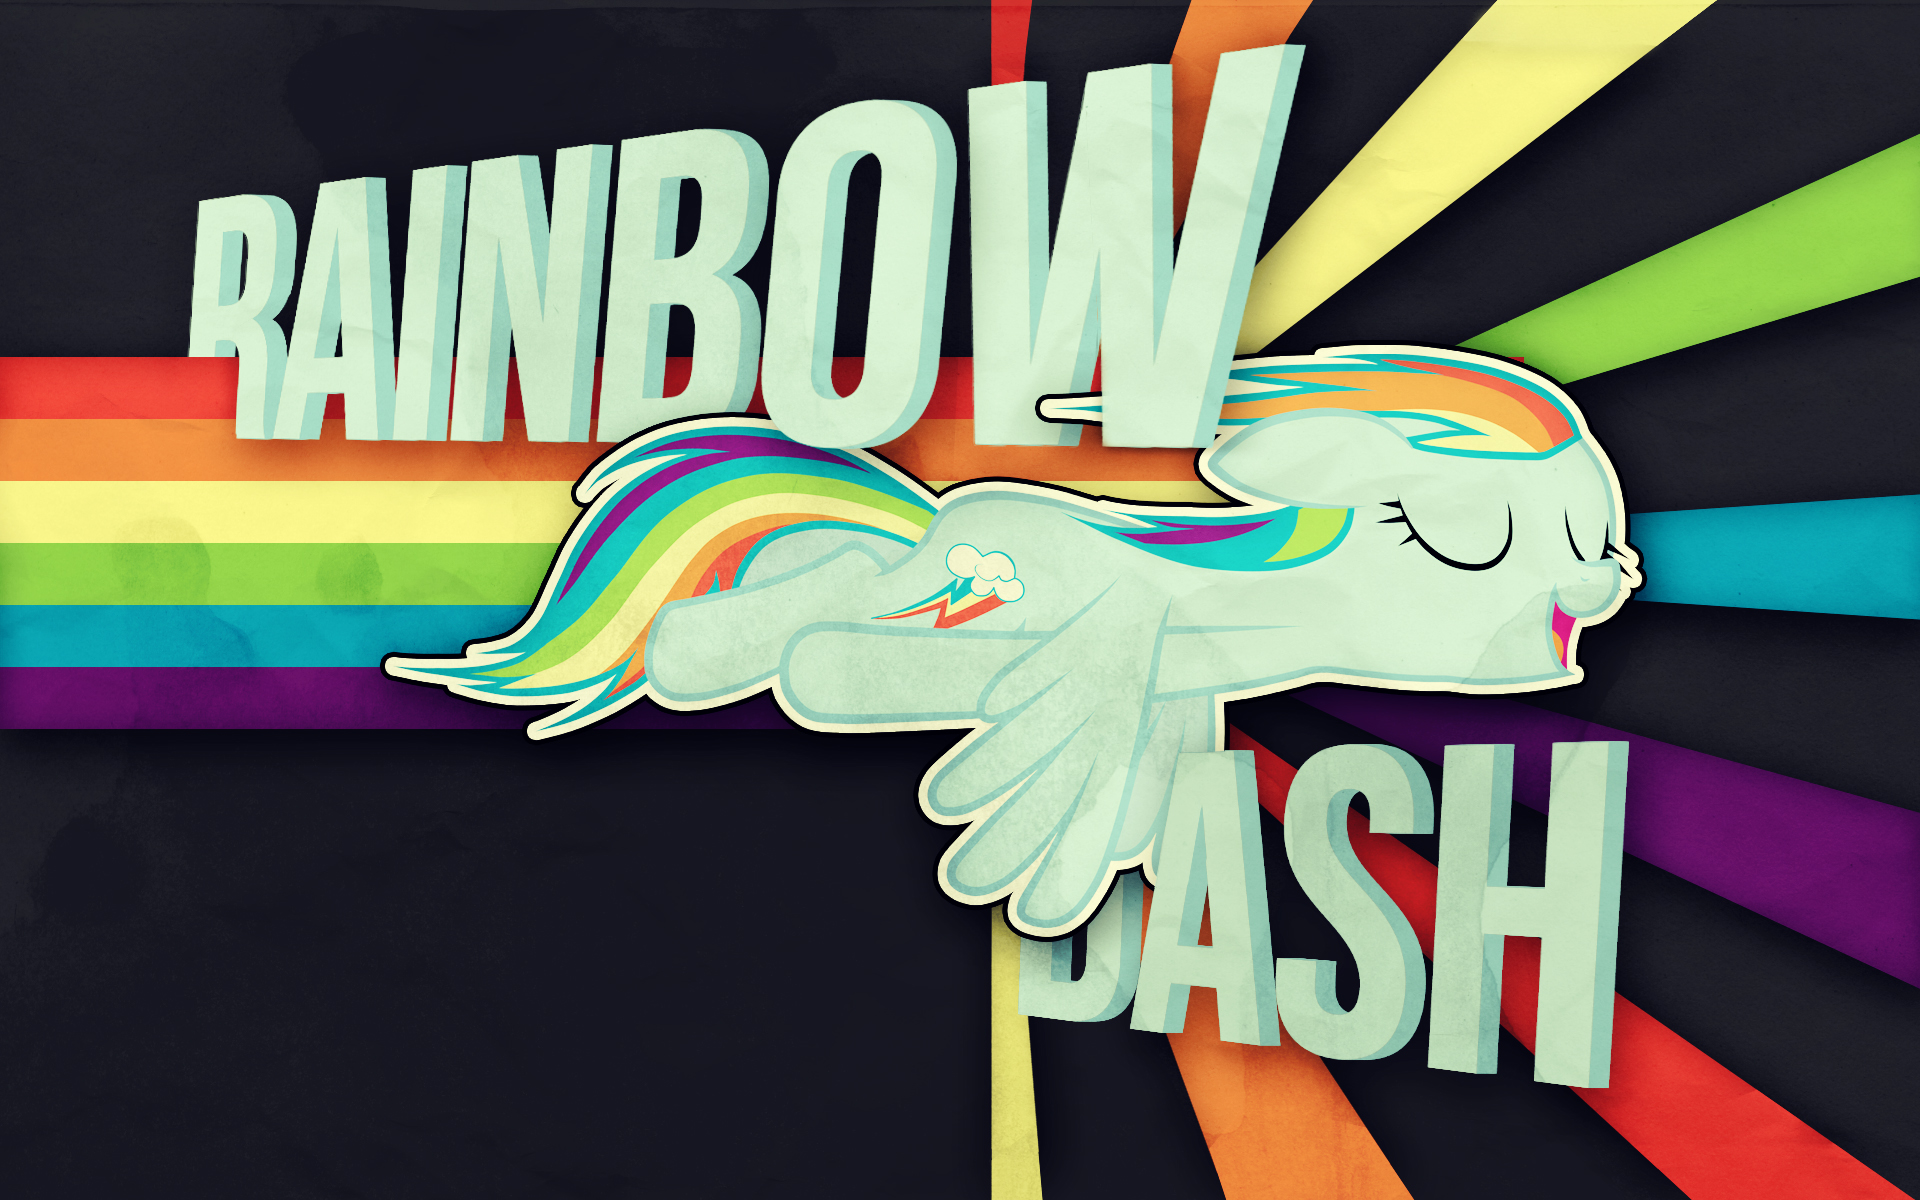 Wallpaper 2: Dashie by Bommster